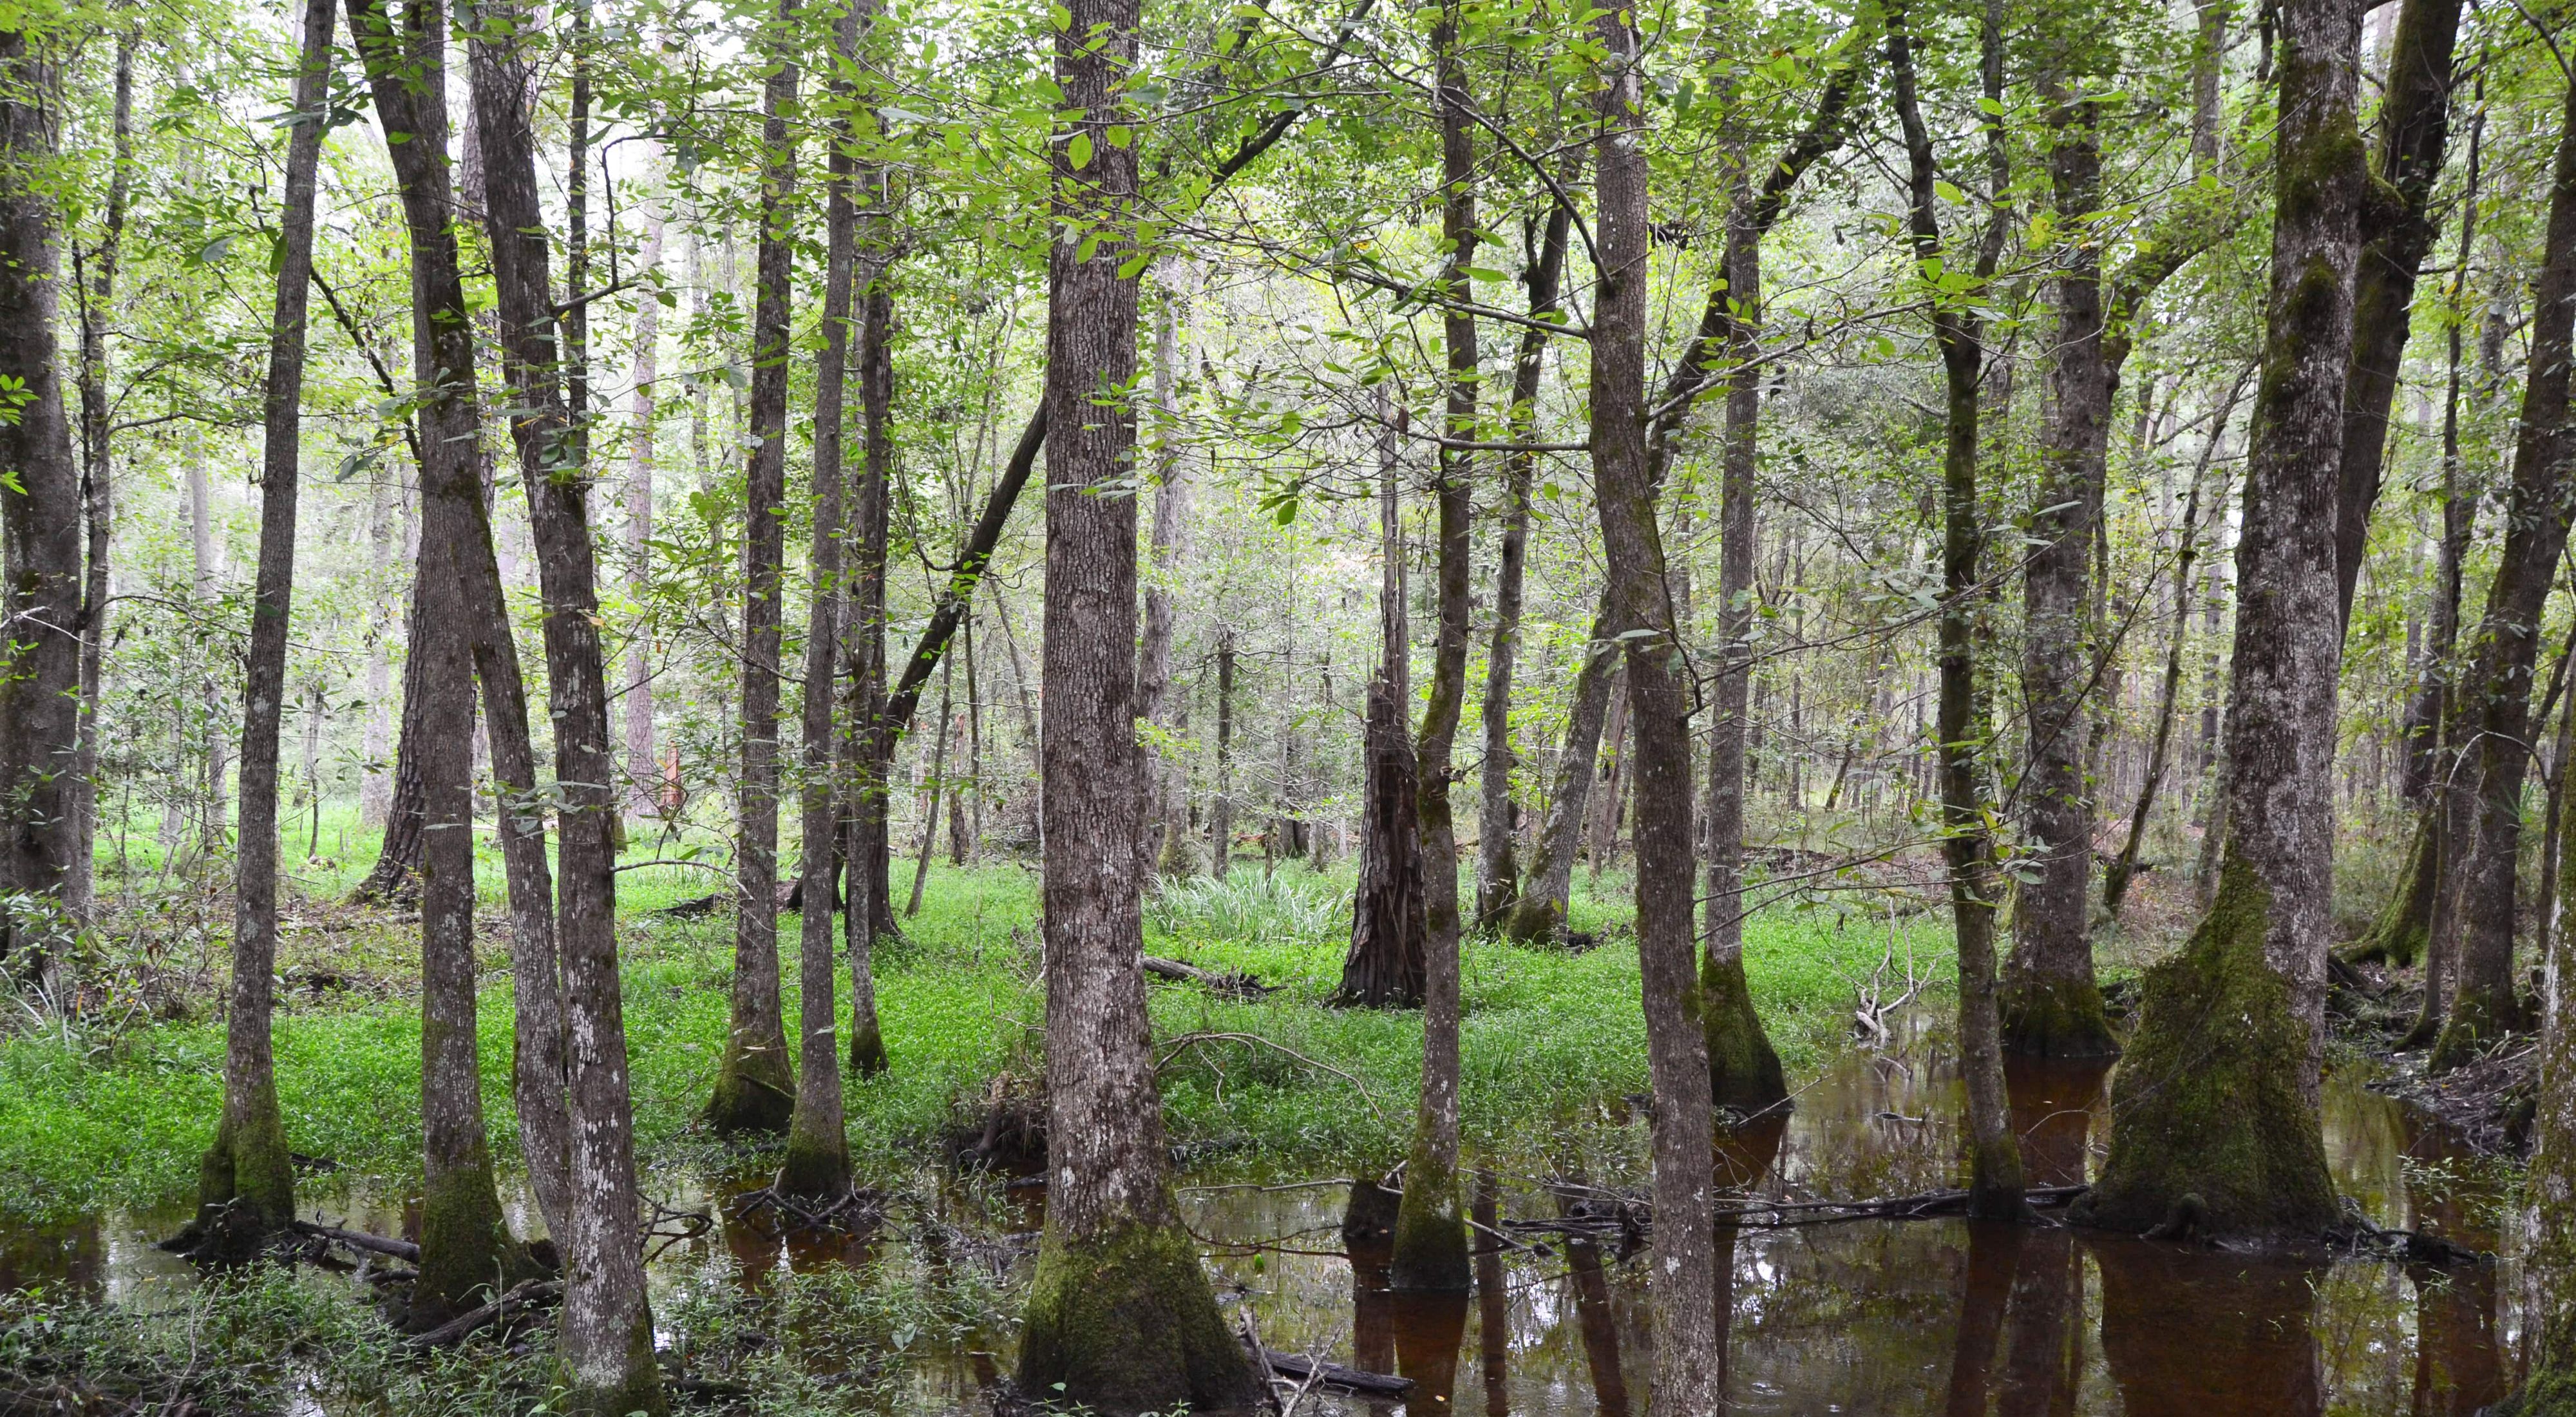 Tall trees emerge from a wet forest floor.